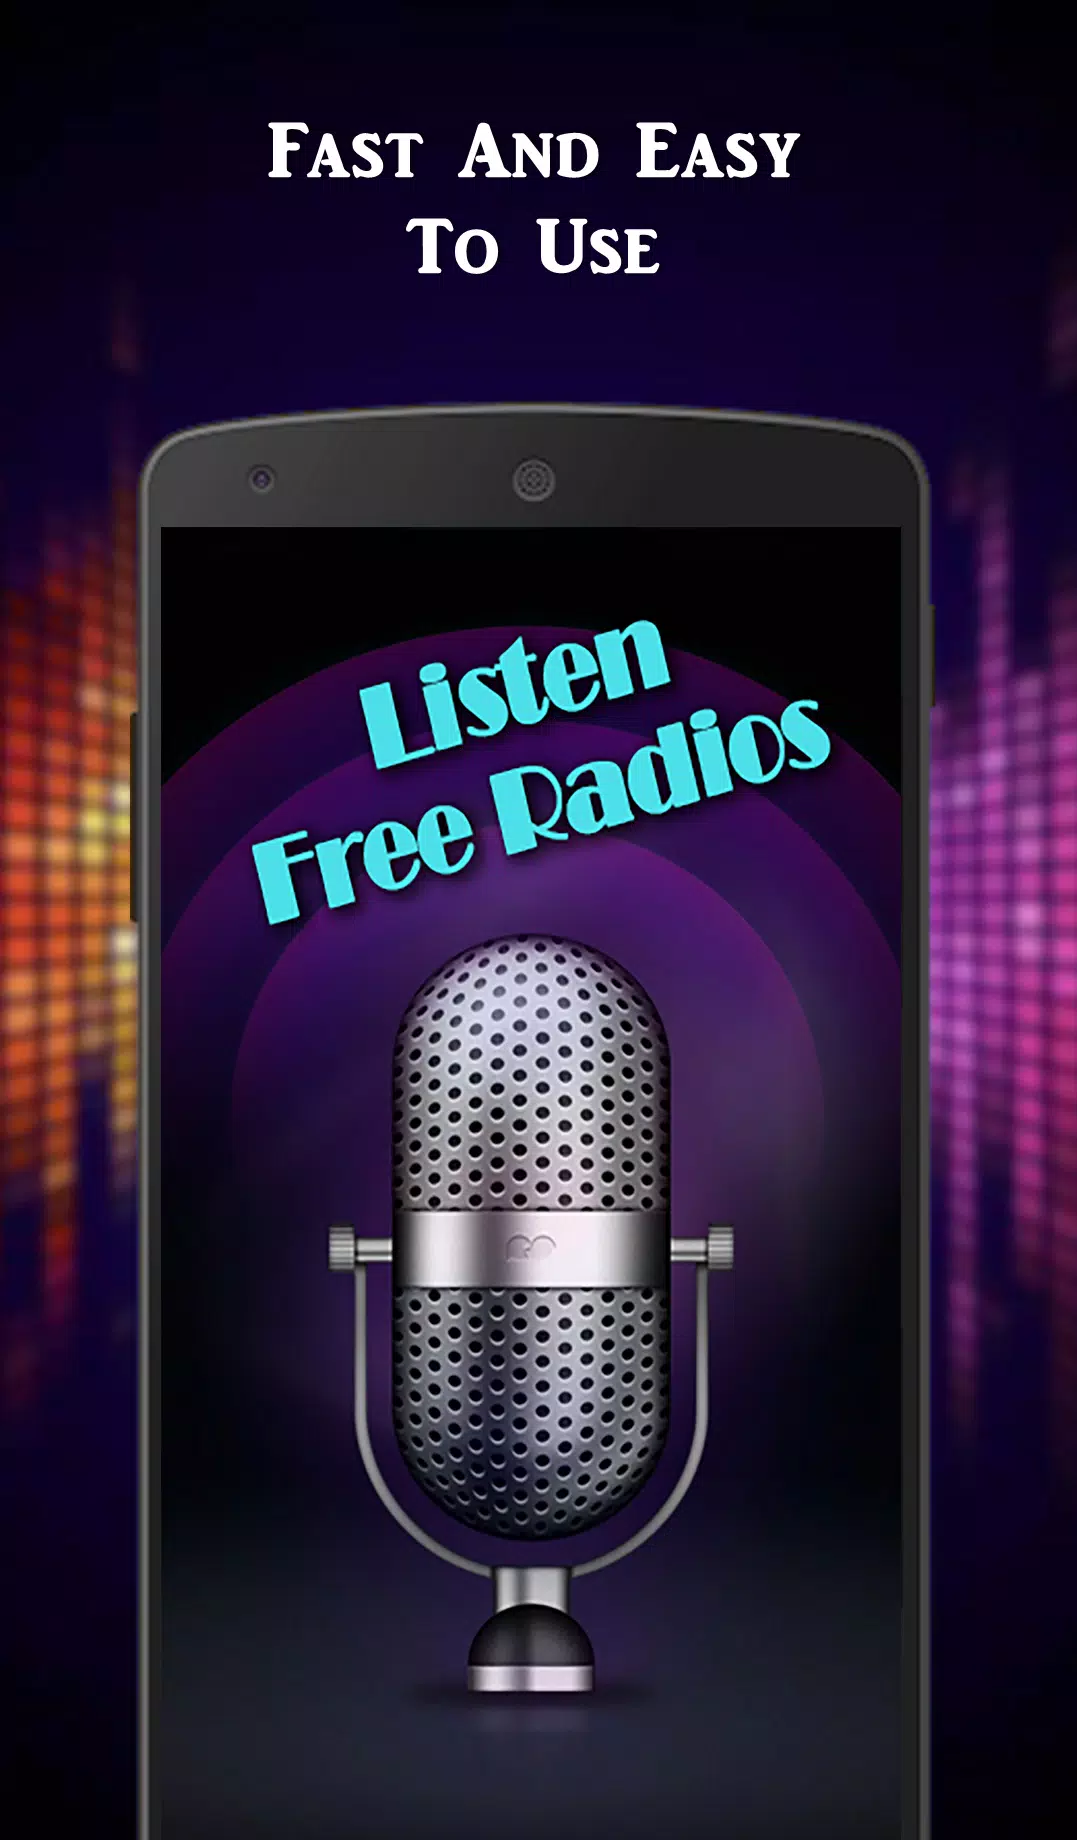 Radio WAWA Poland for Android - APK Download